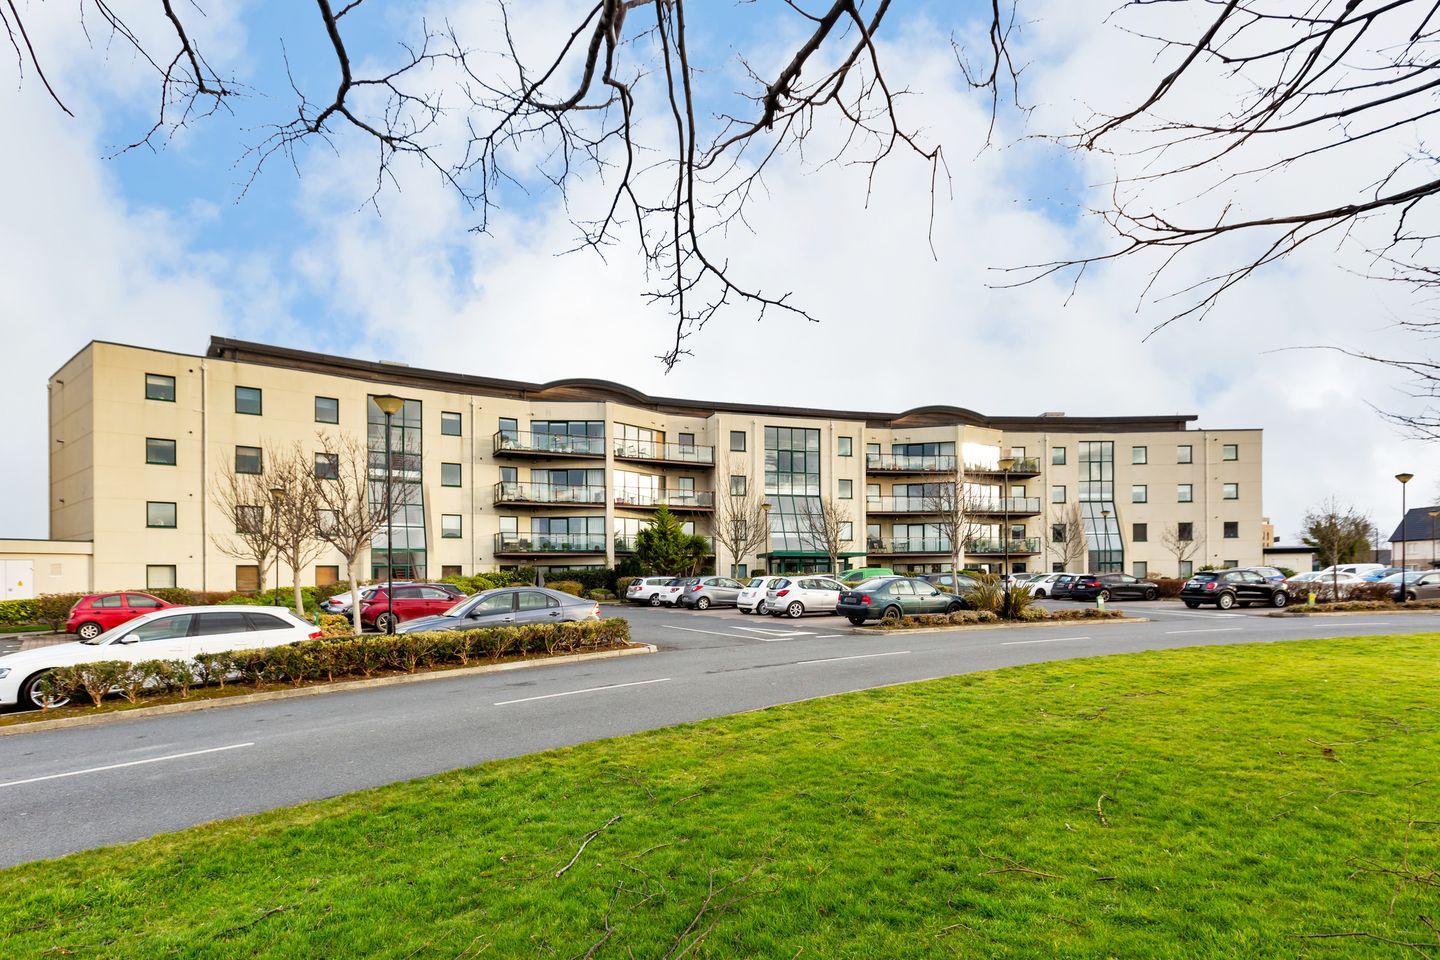 Apartment 201, Compass, Seabourne View, Greystones, Co. Wicklow